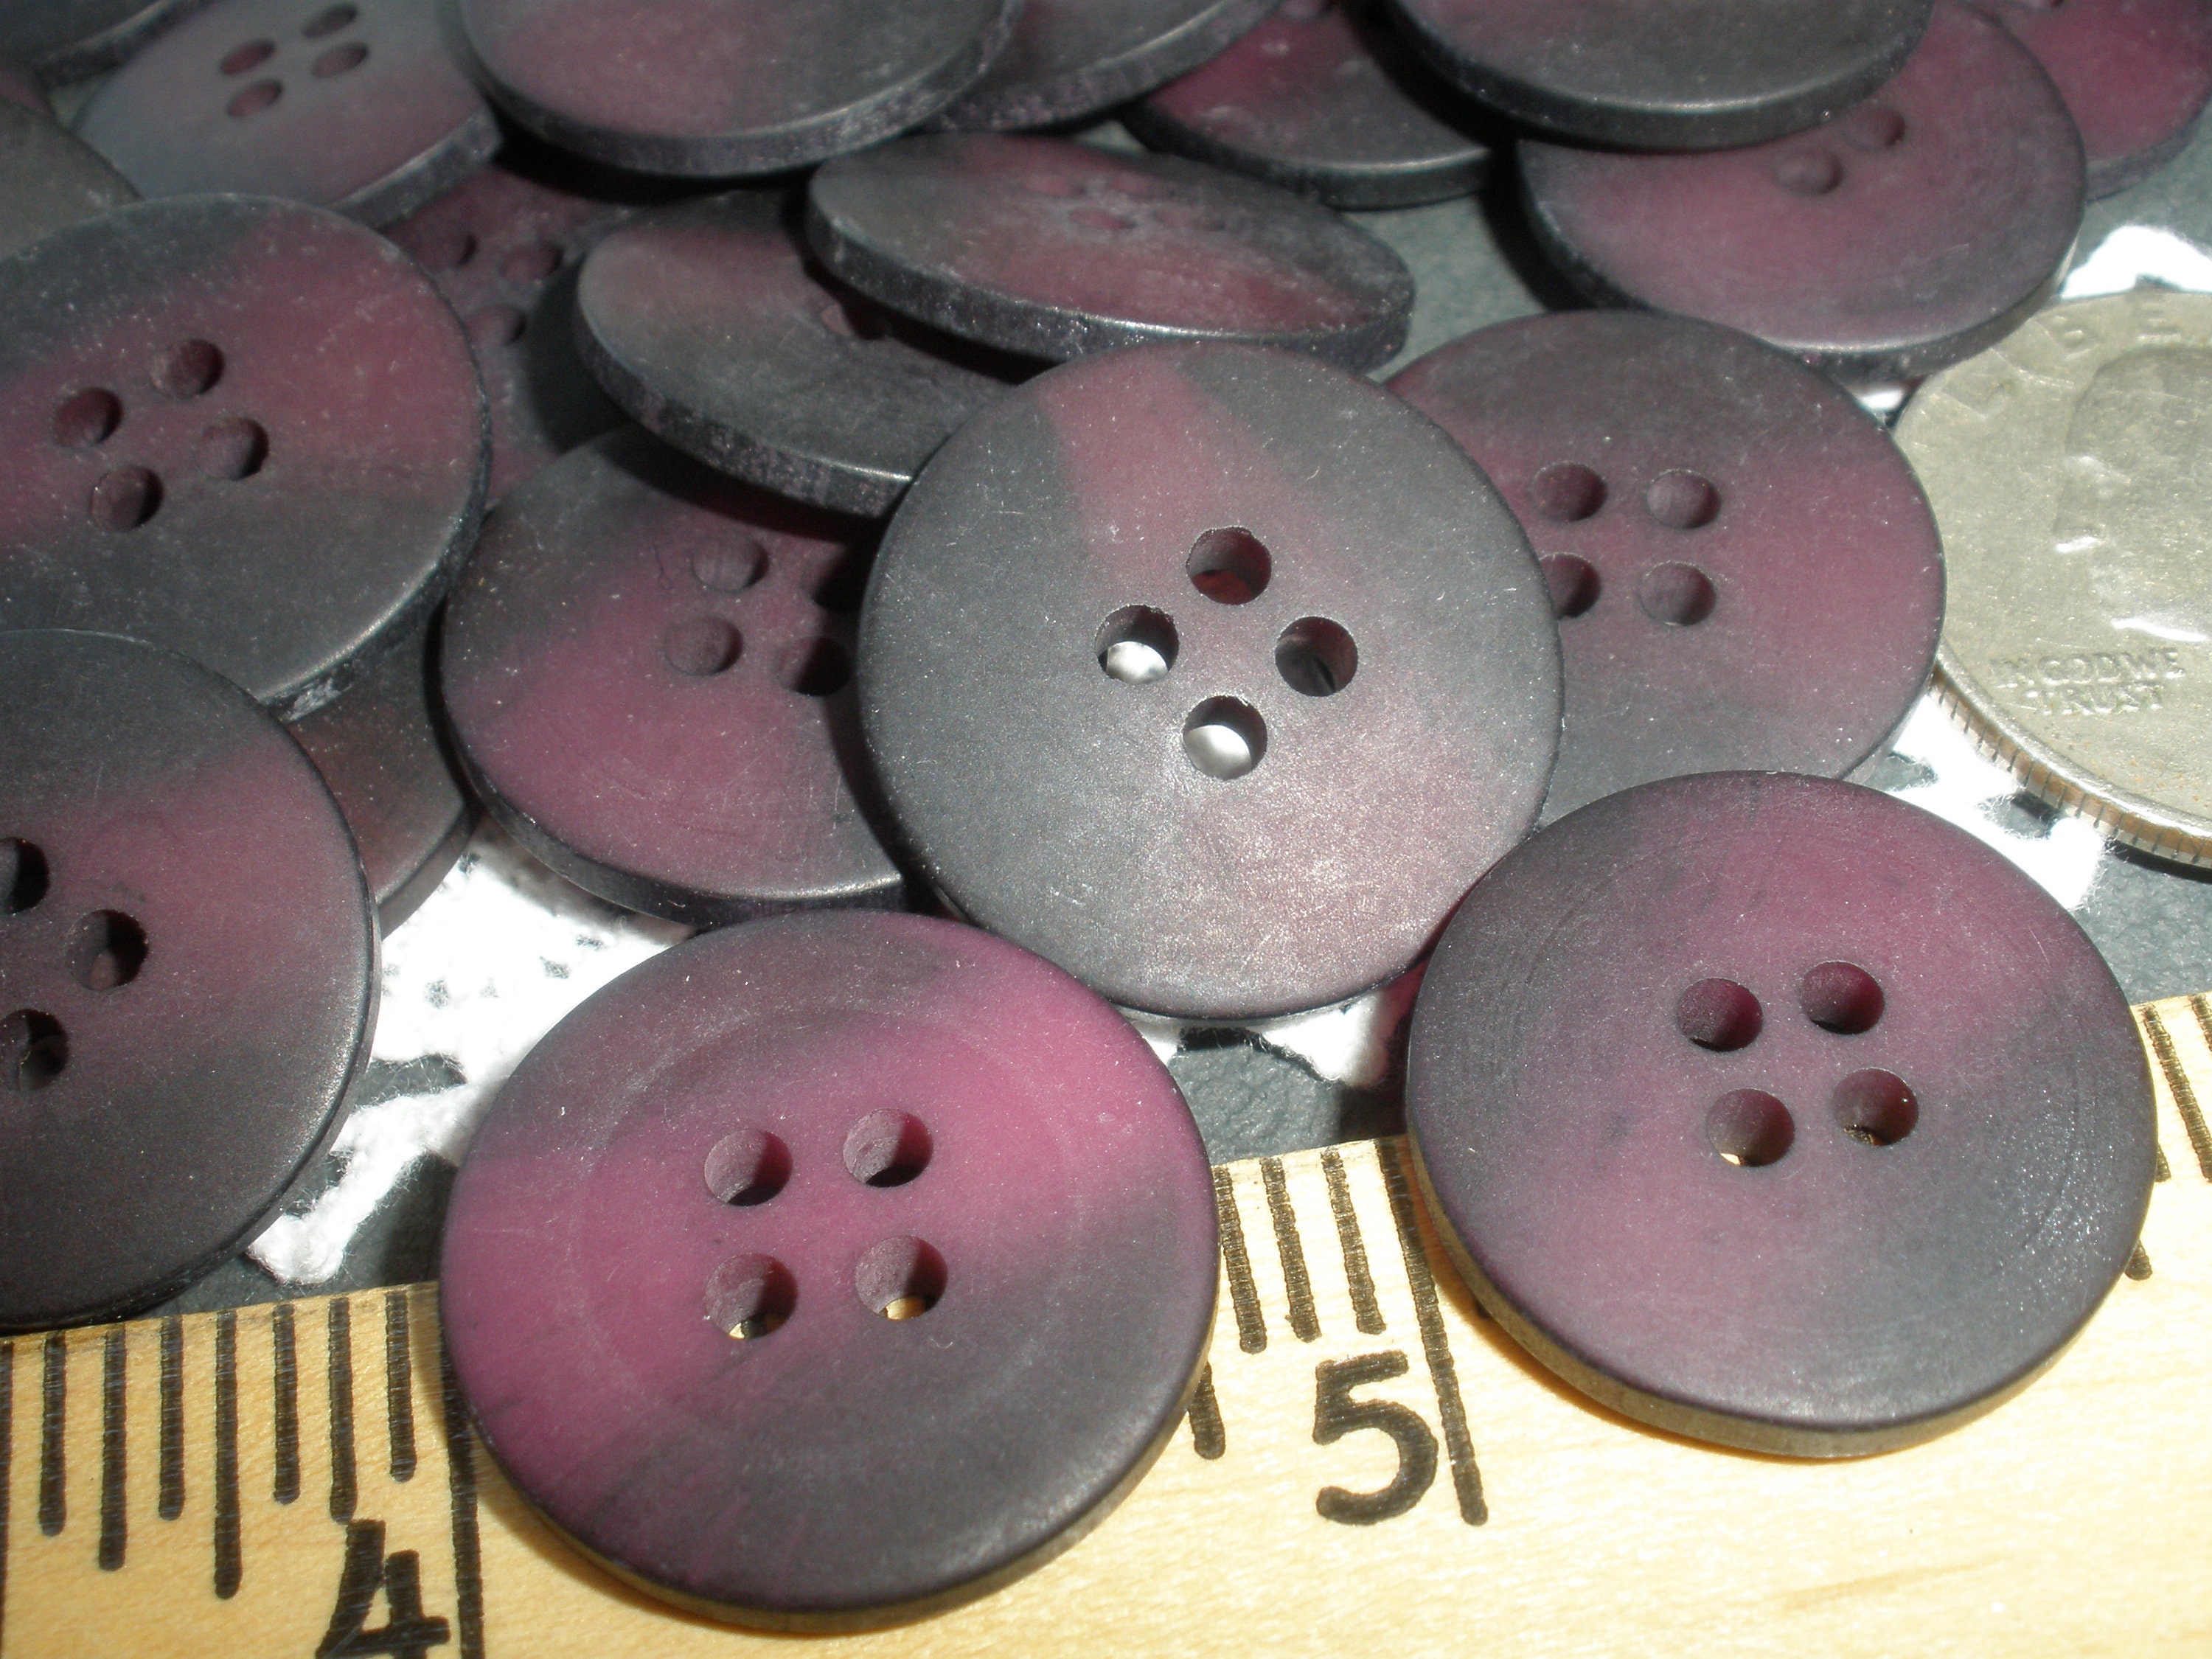 Light Brown Leather Shank Buttons - 10 Pieces – Bead Goes On